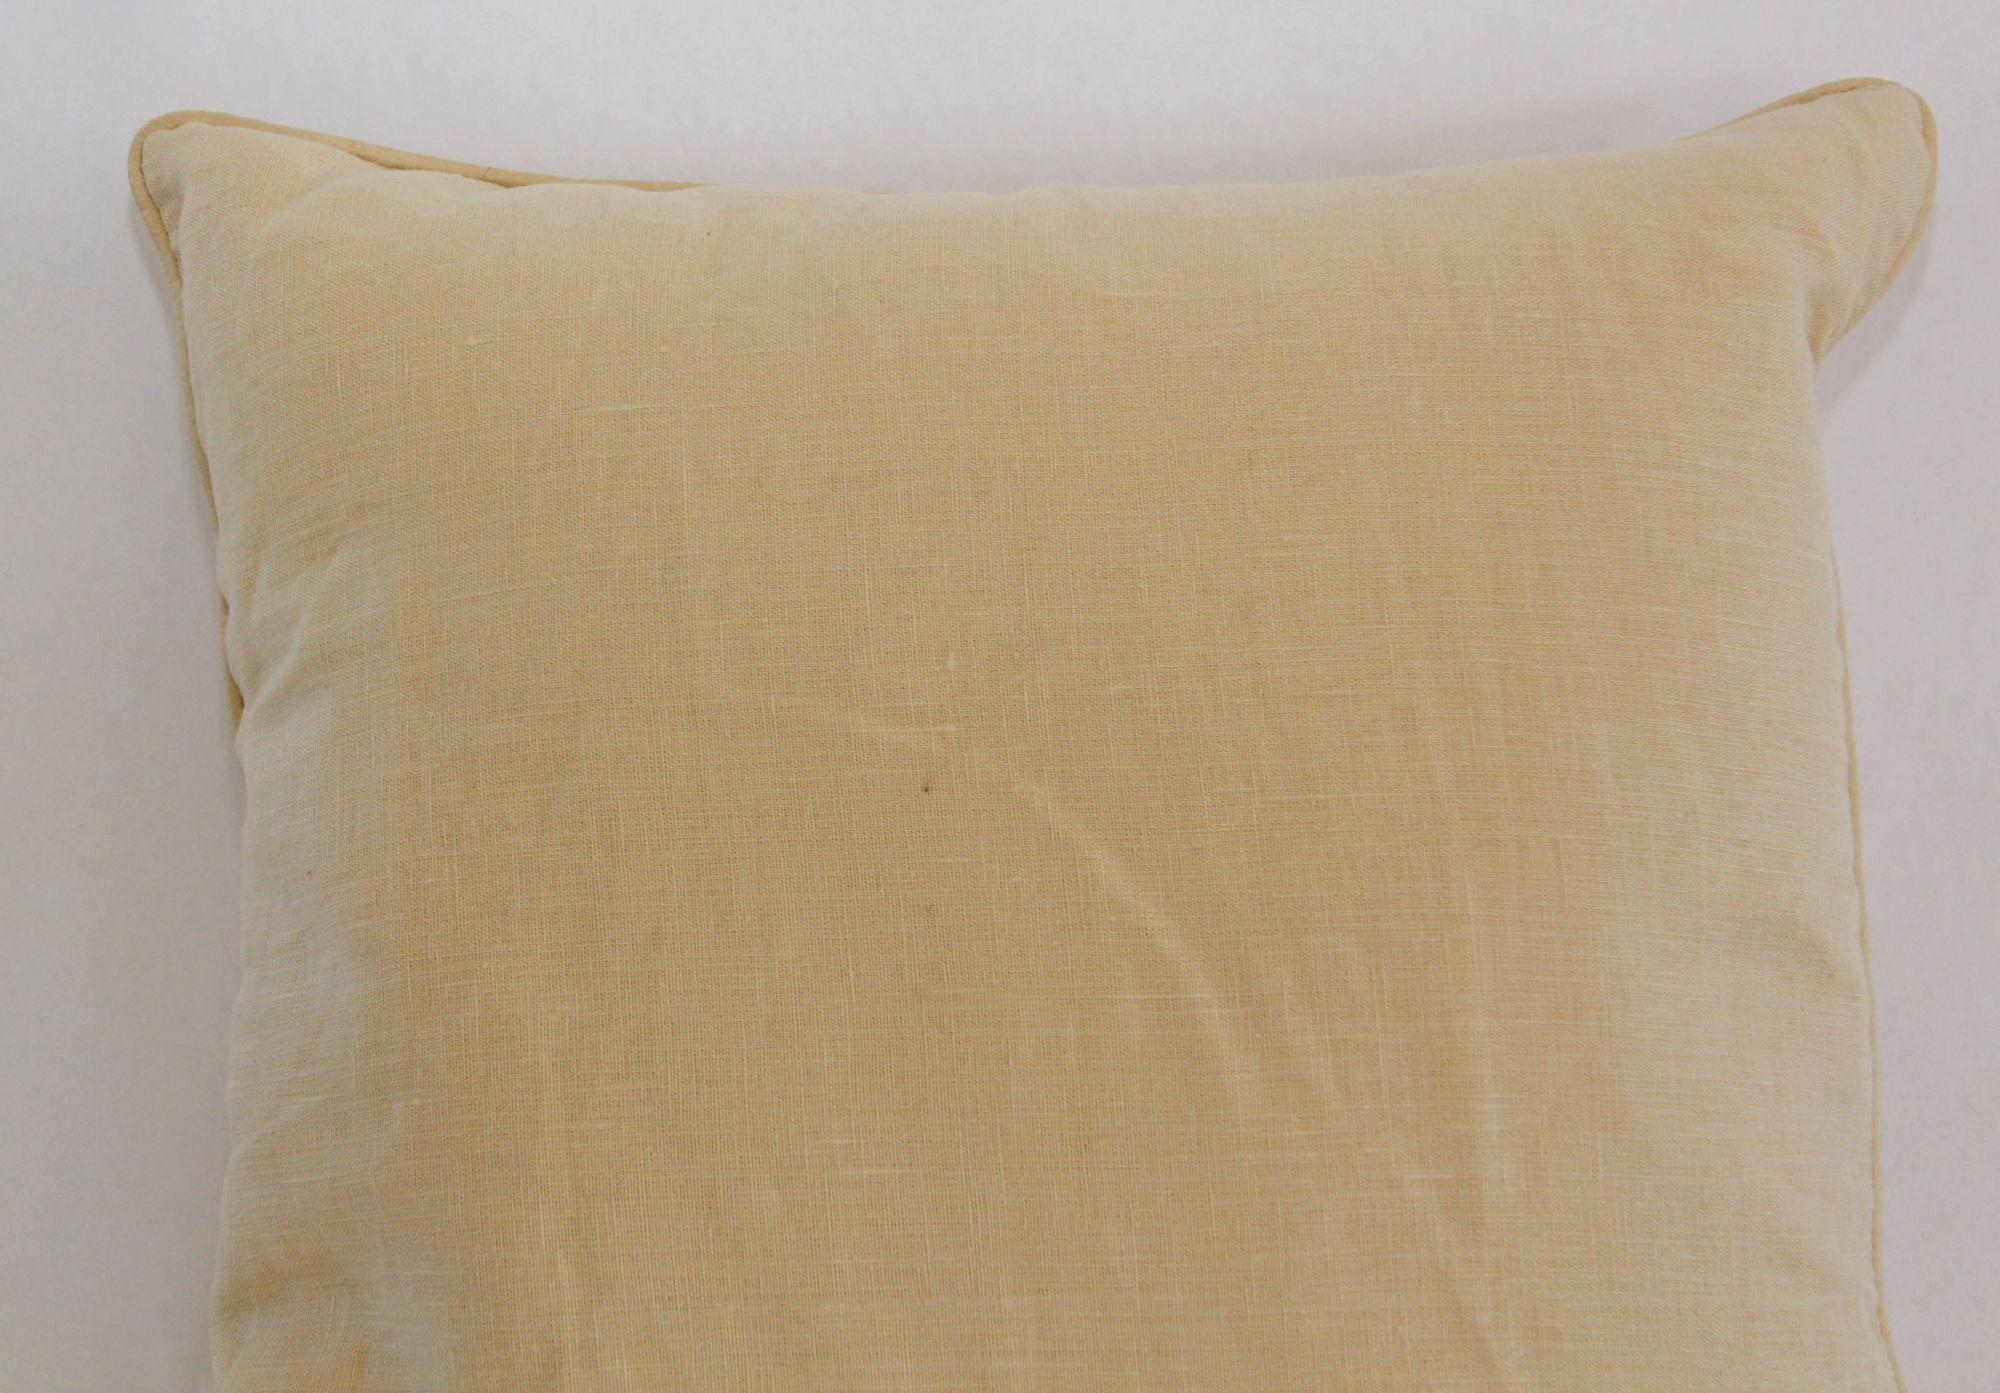 Vintage Belgium Linen Beige Country Throw Pillow In Good Condition For Sale In North Hollywood, CA